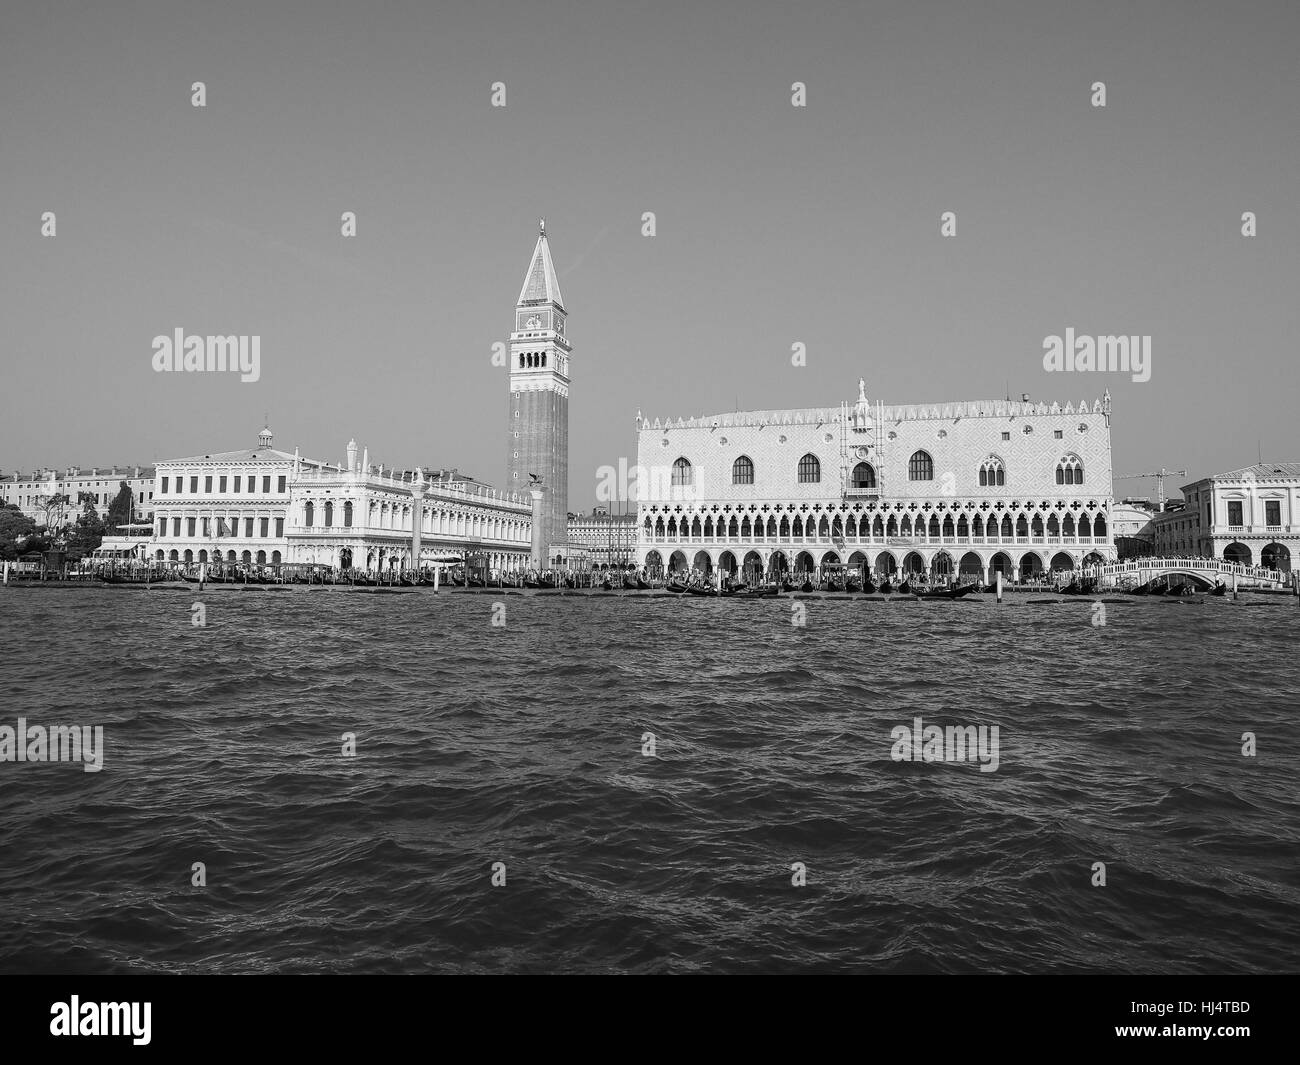 Piazza San Marco (meaning St Mark square) seen from San Marco basin in Venice, Italy in black and white Stock Photo